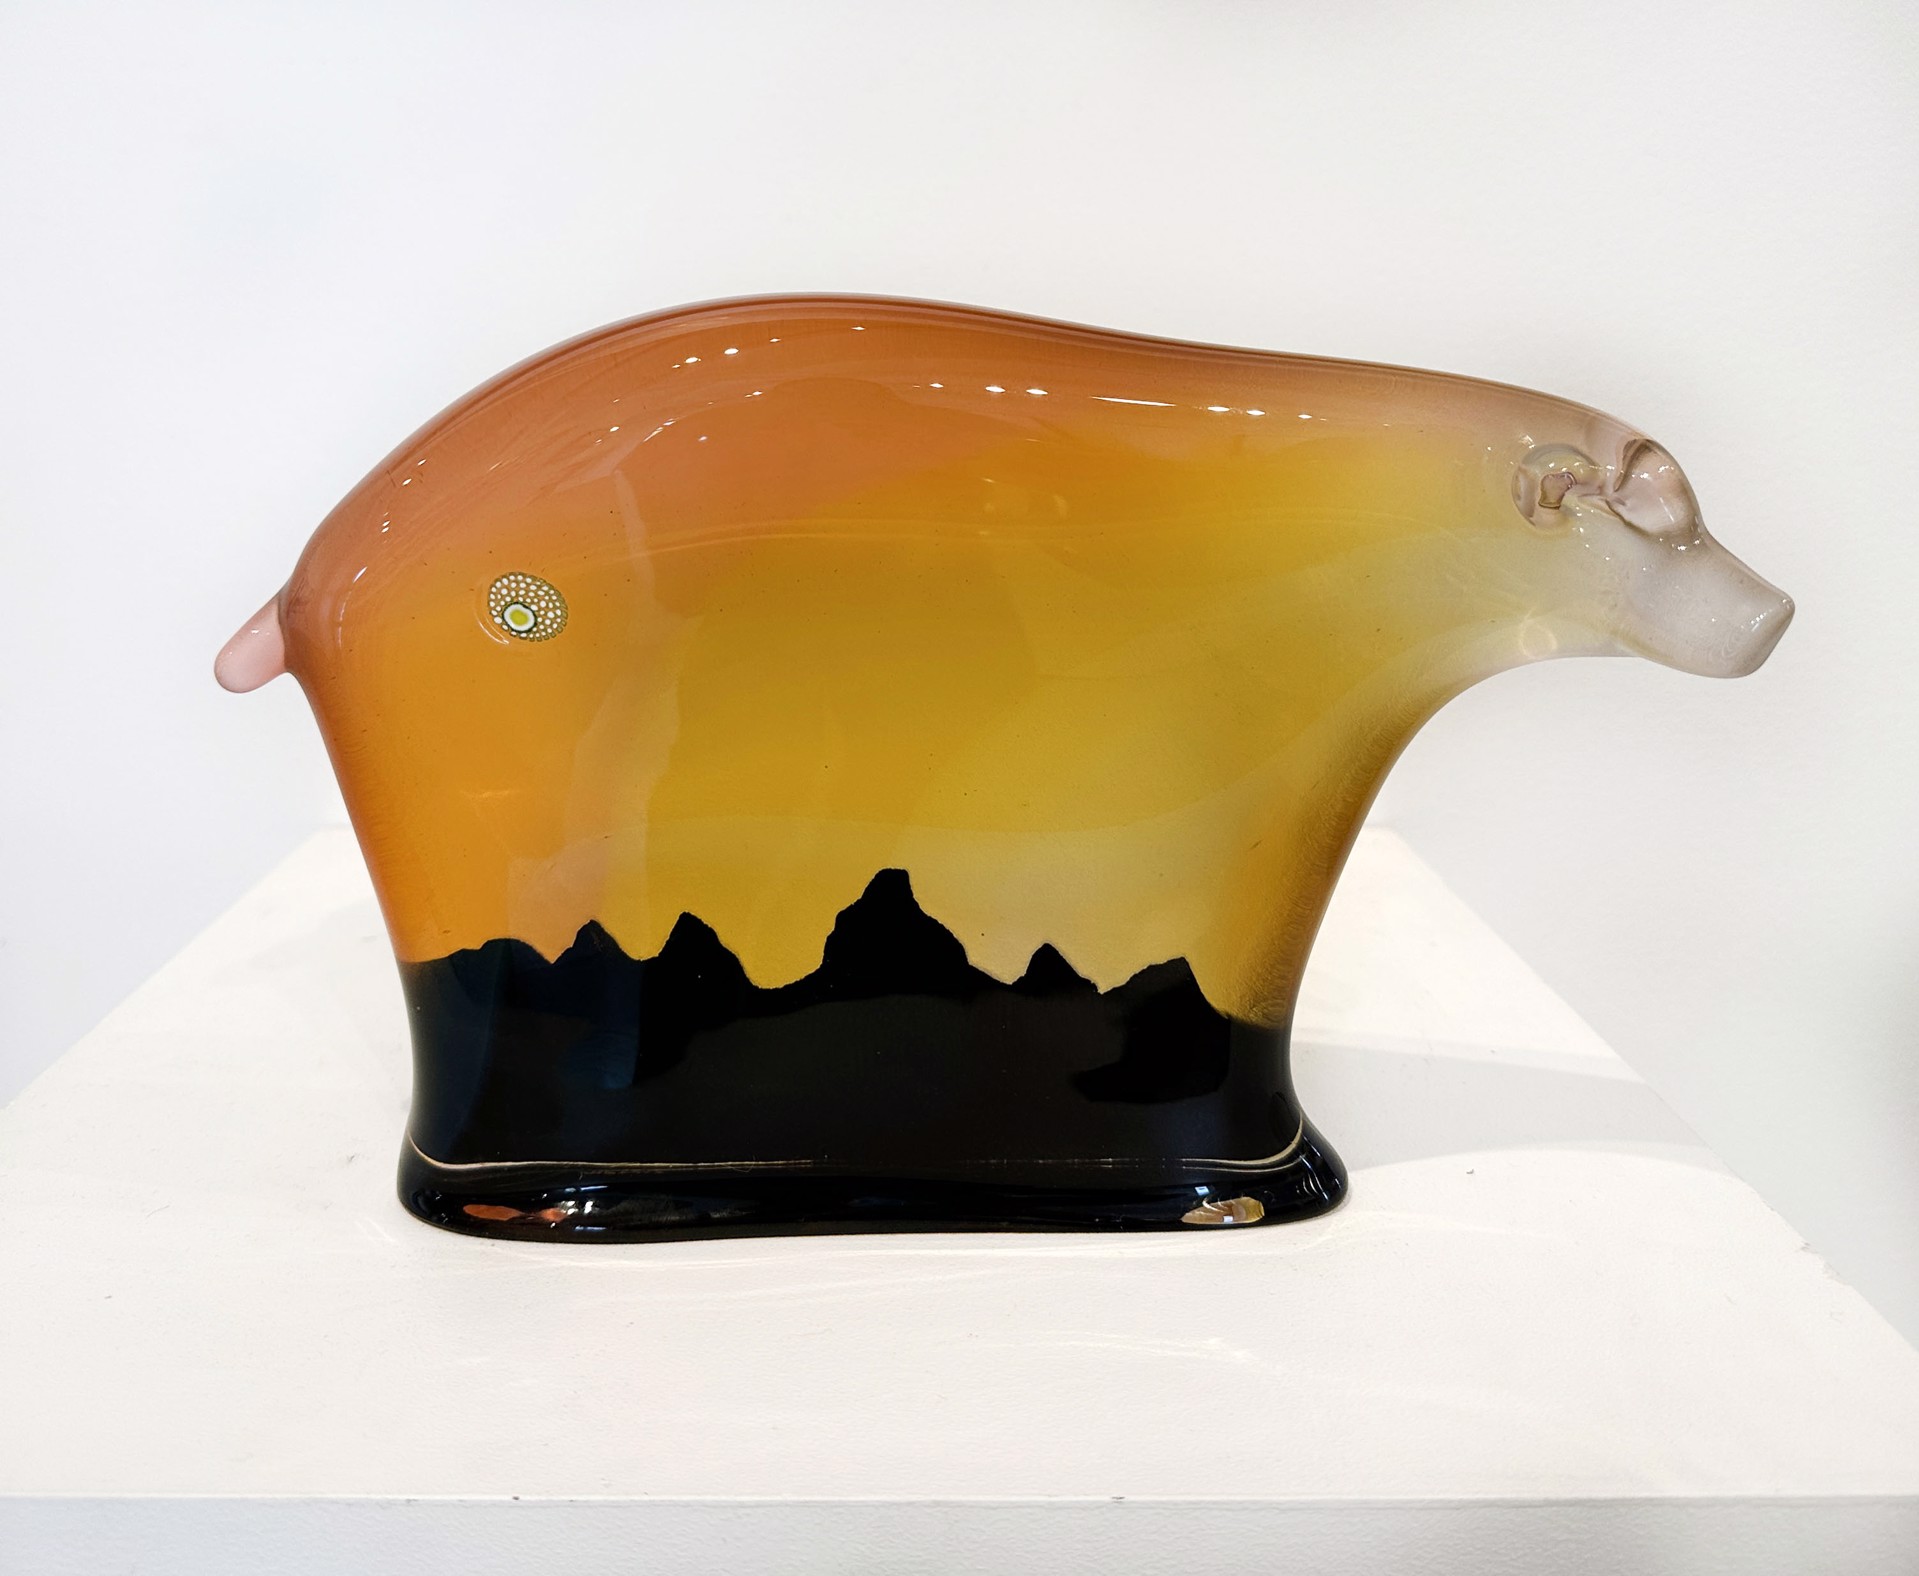 Original Glass Blow Sculpture By Dan Friday Featuring An Abstracted Bear Form In Orange To Yellow Gradient With The Teton Mountain Range Silhouette In Deep Purple